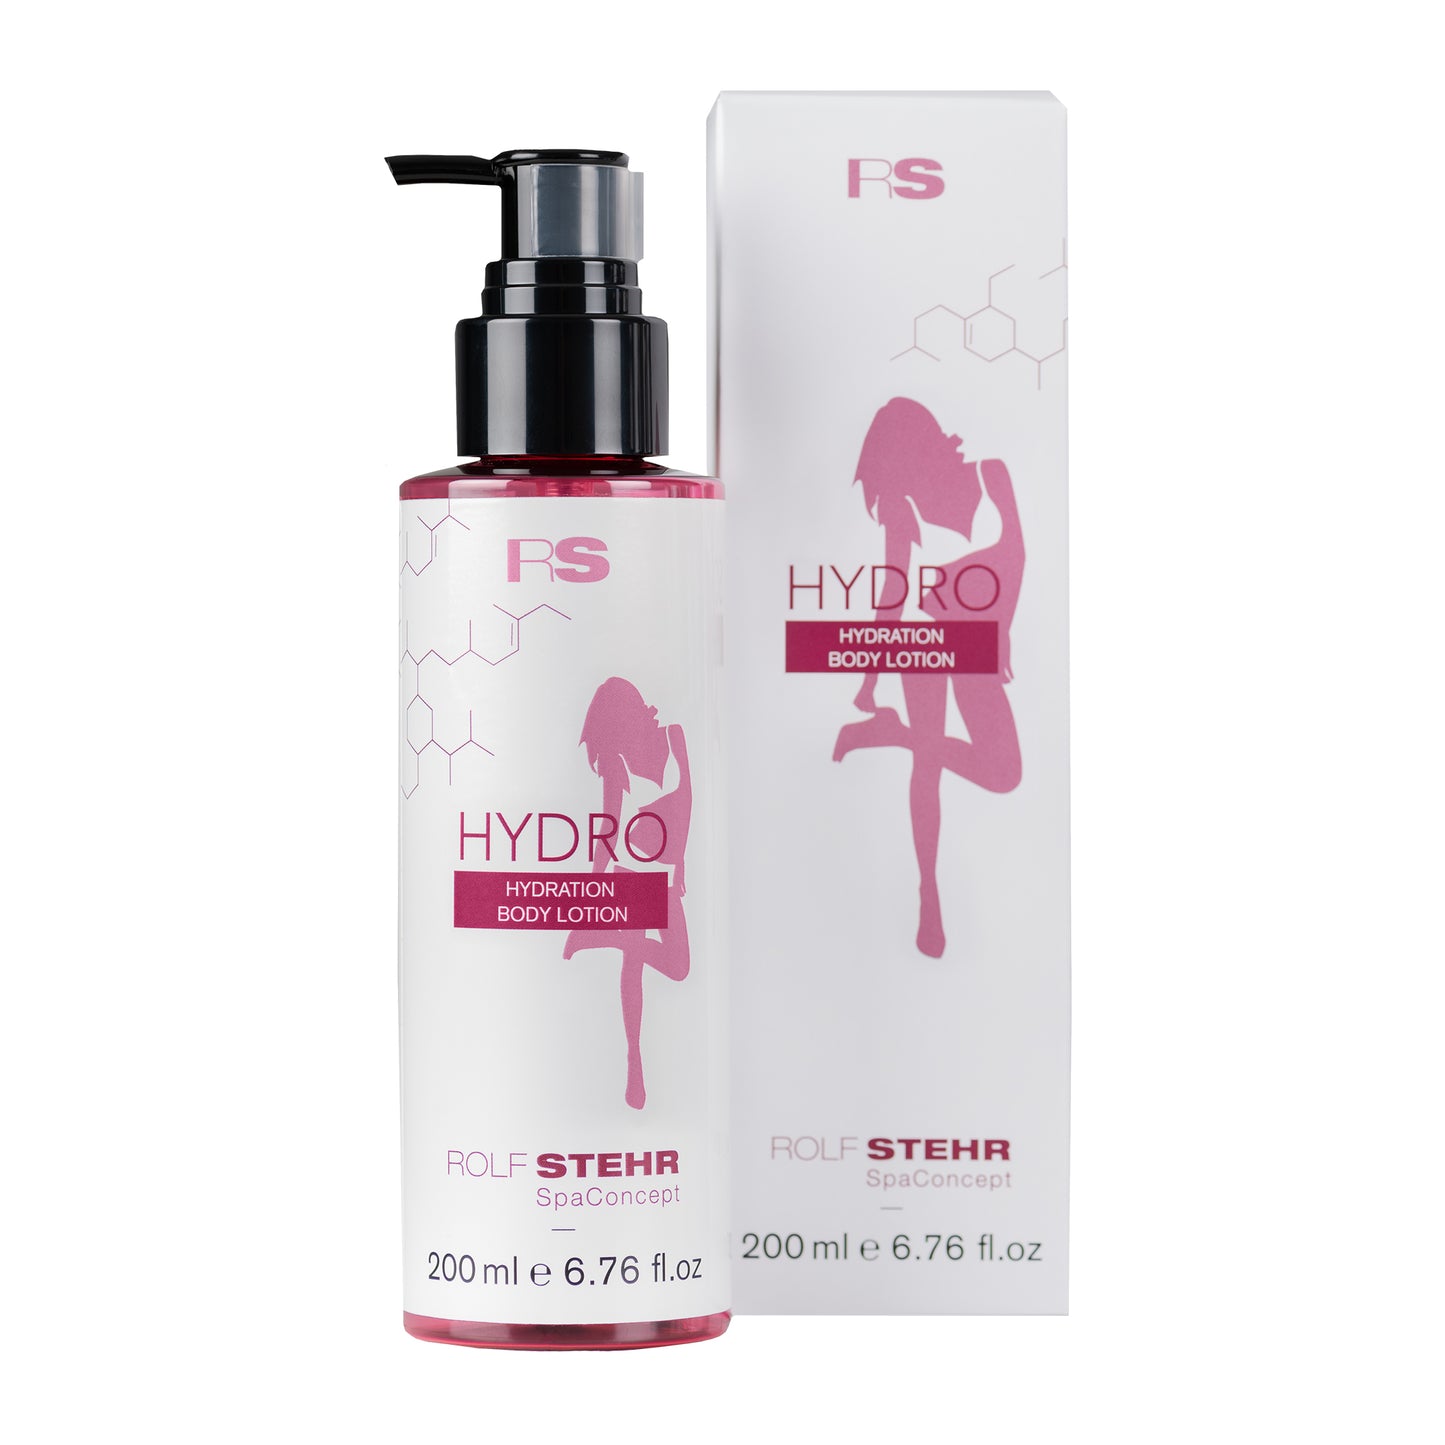 HYDRO Hydration Body Lotion <br> SpaConcept